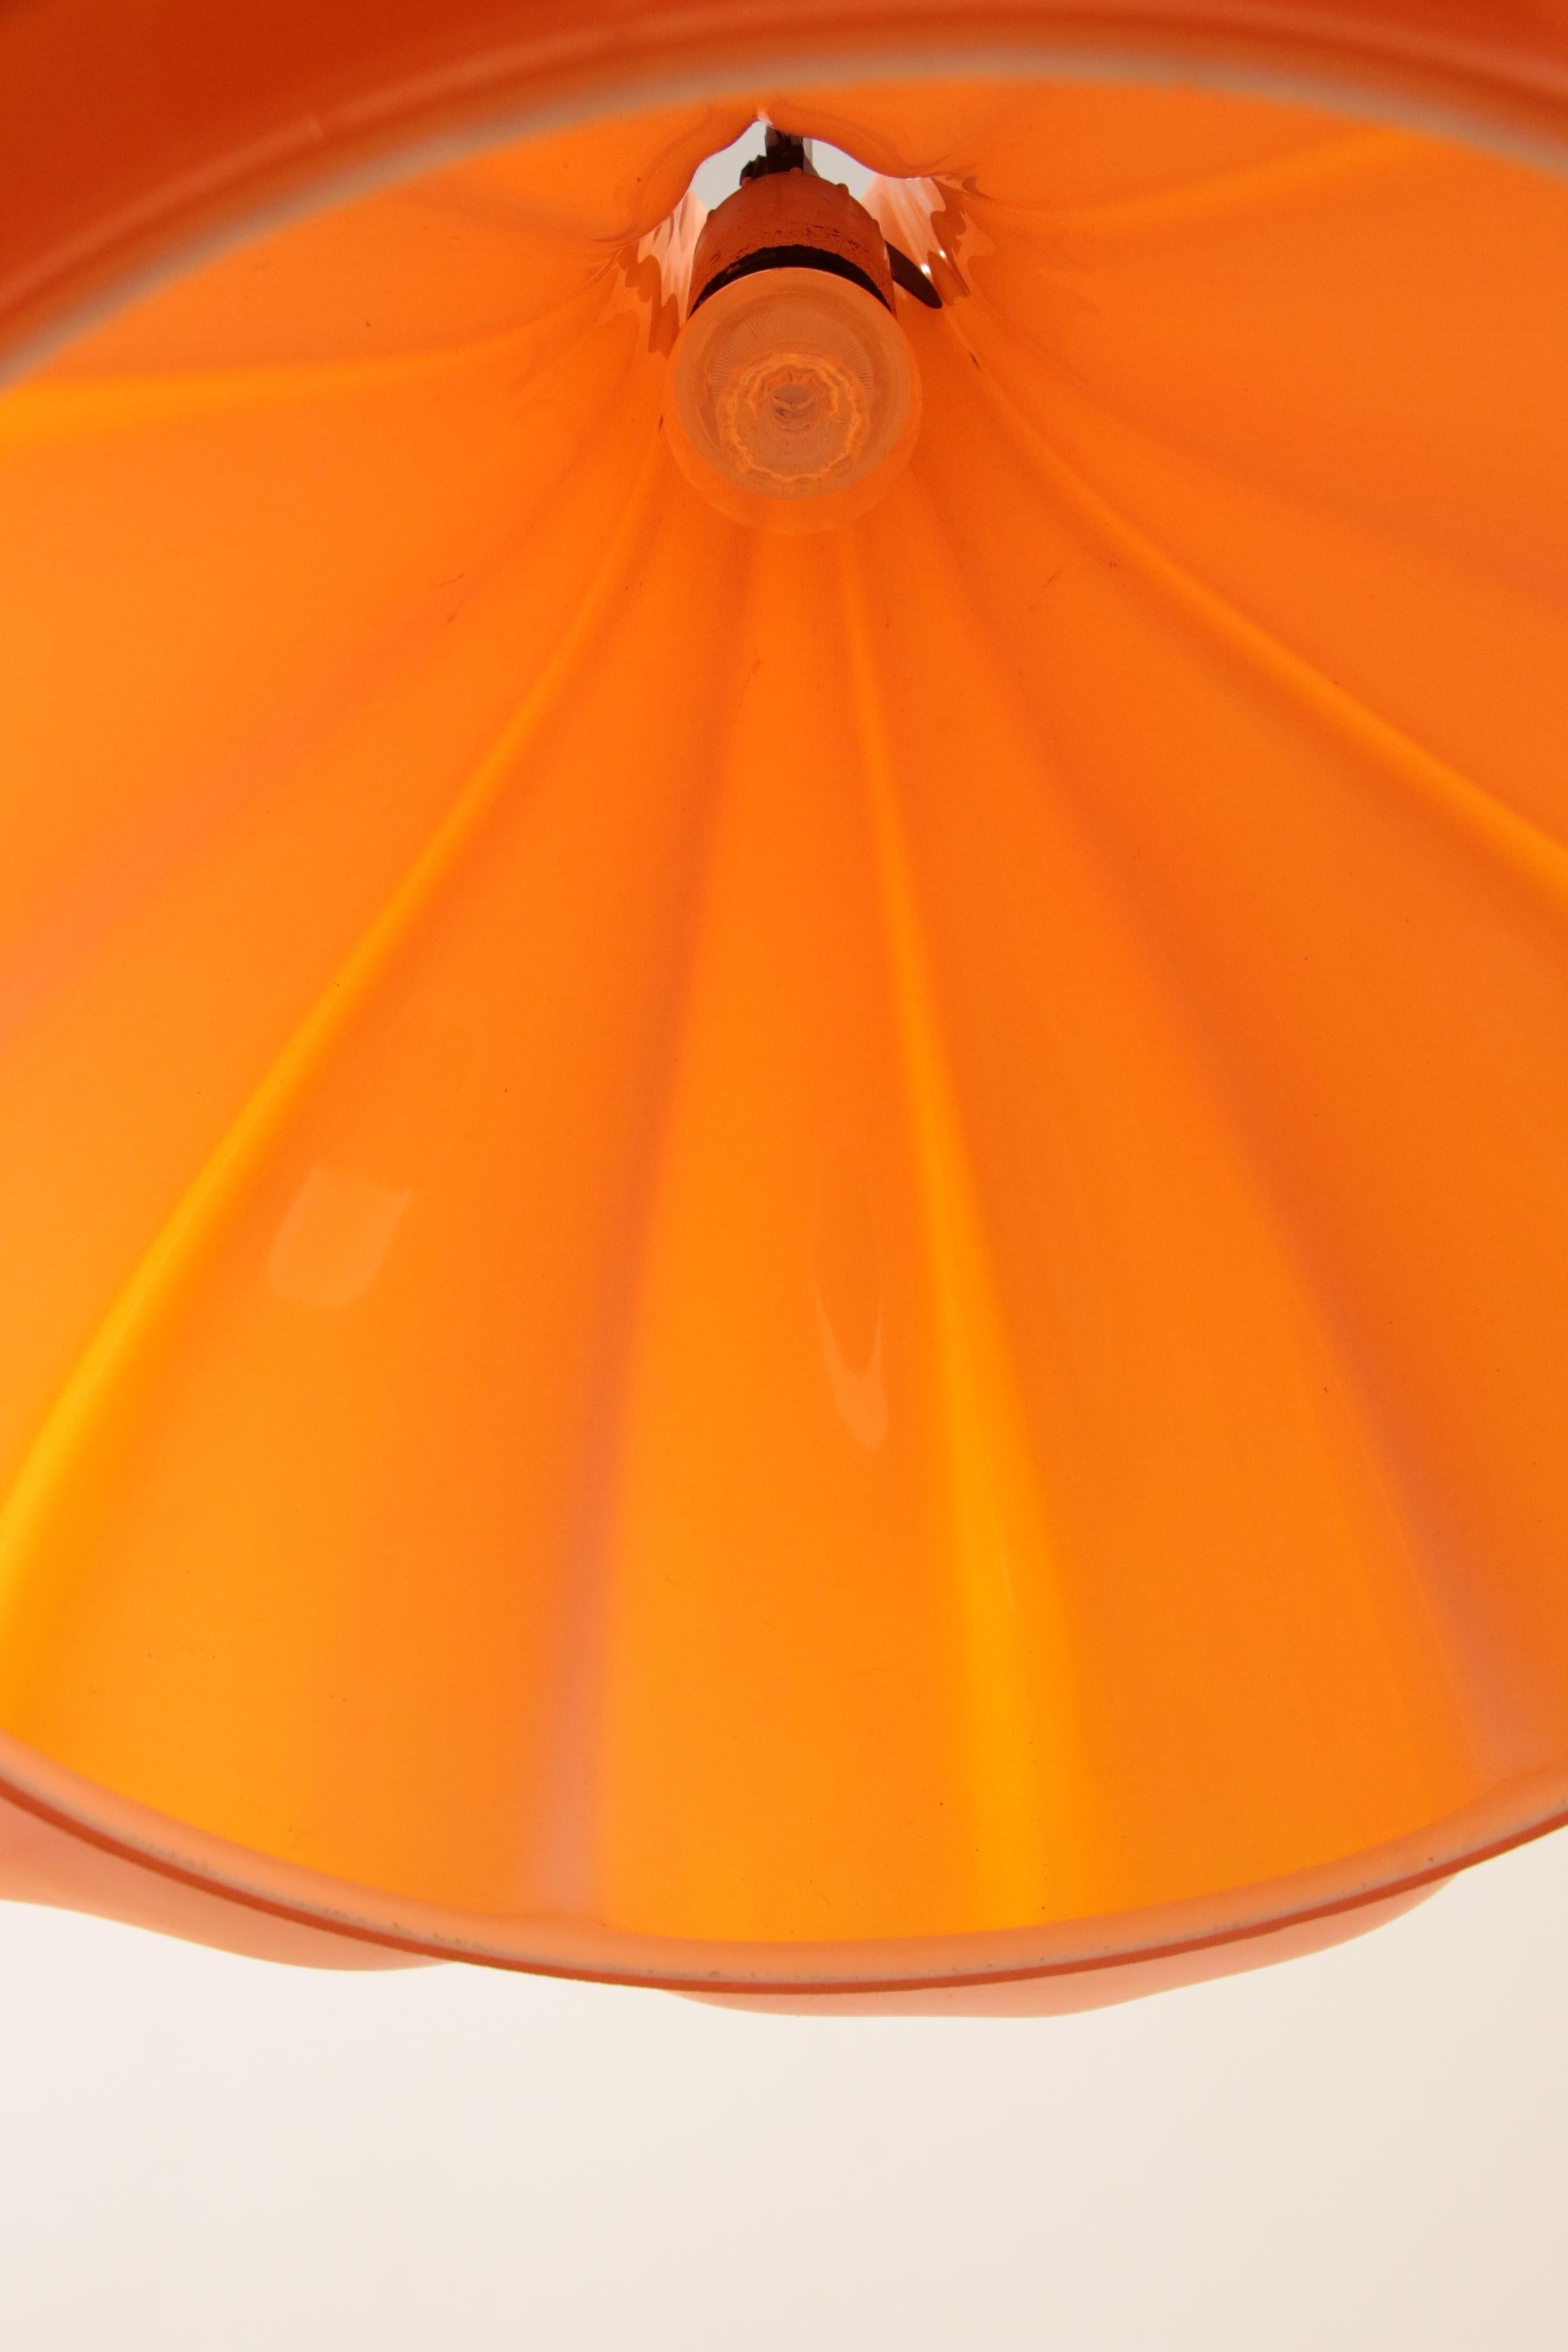 Vintage Orange Glass Pendant Lamp by Peill and Putzler, 1960 For Sale 2